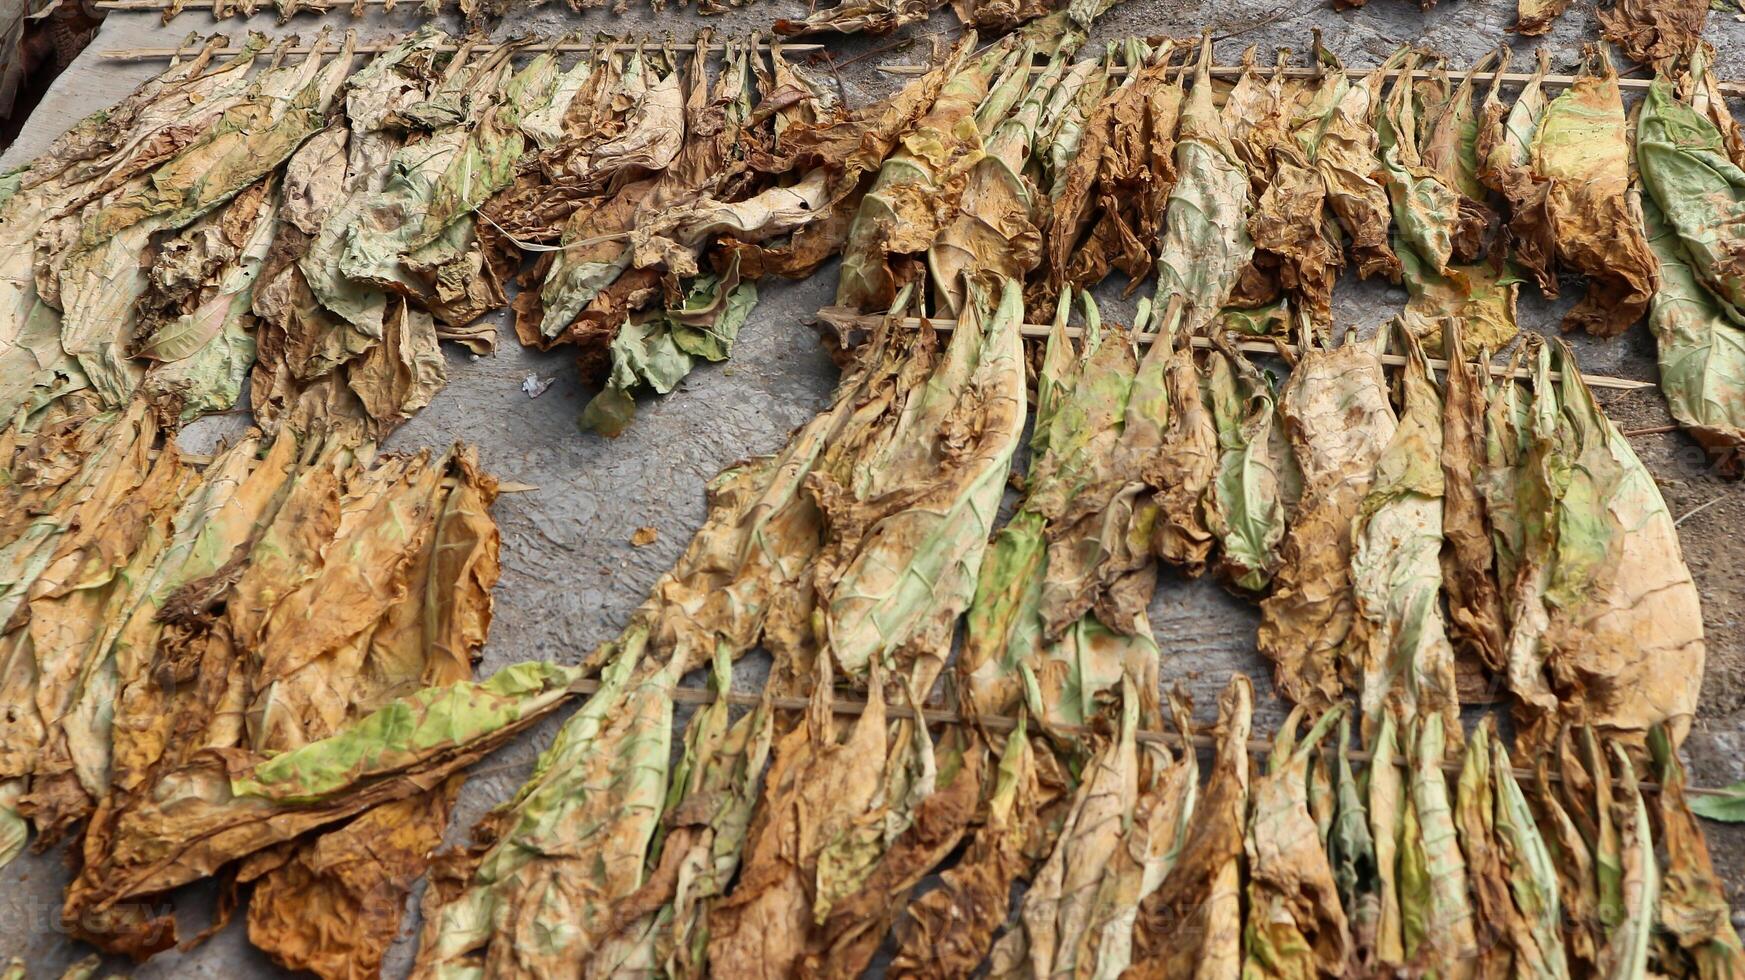 drying tobacco leaves in the sun, indonesia. photo